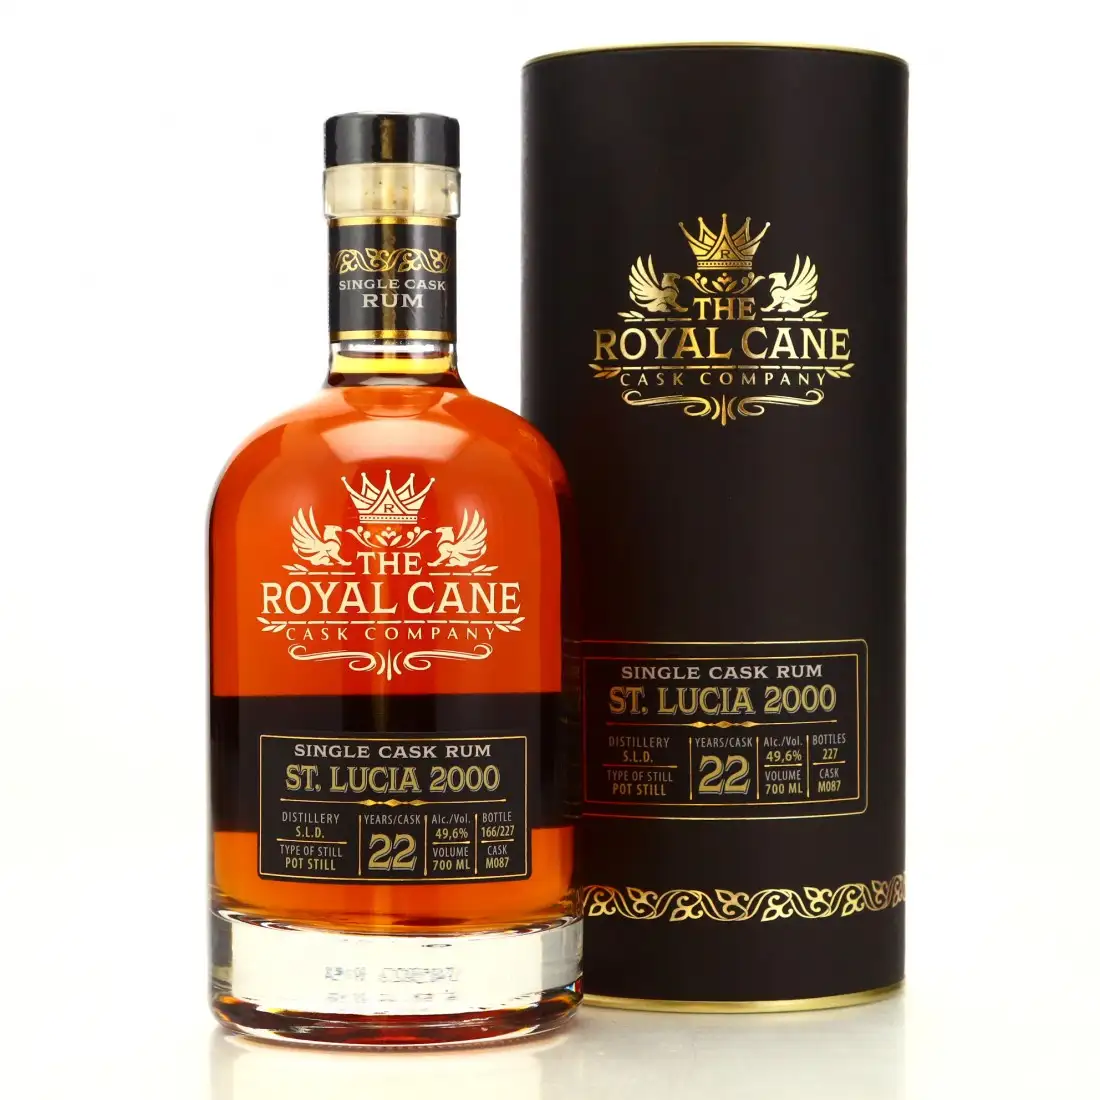 Image of the front of the bottle of the rum The Royal Cane Cask Company St. Lucia 2000 John Dore